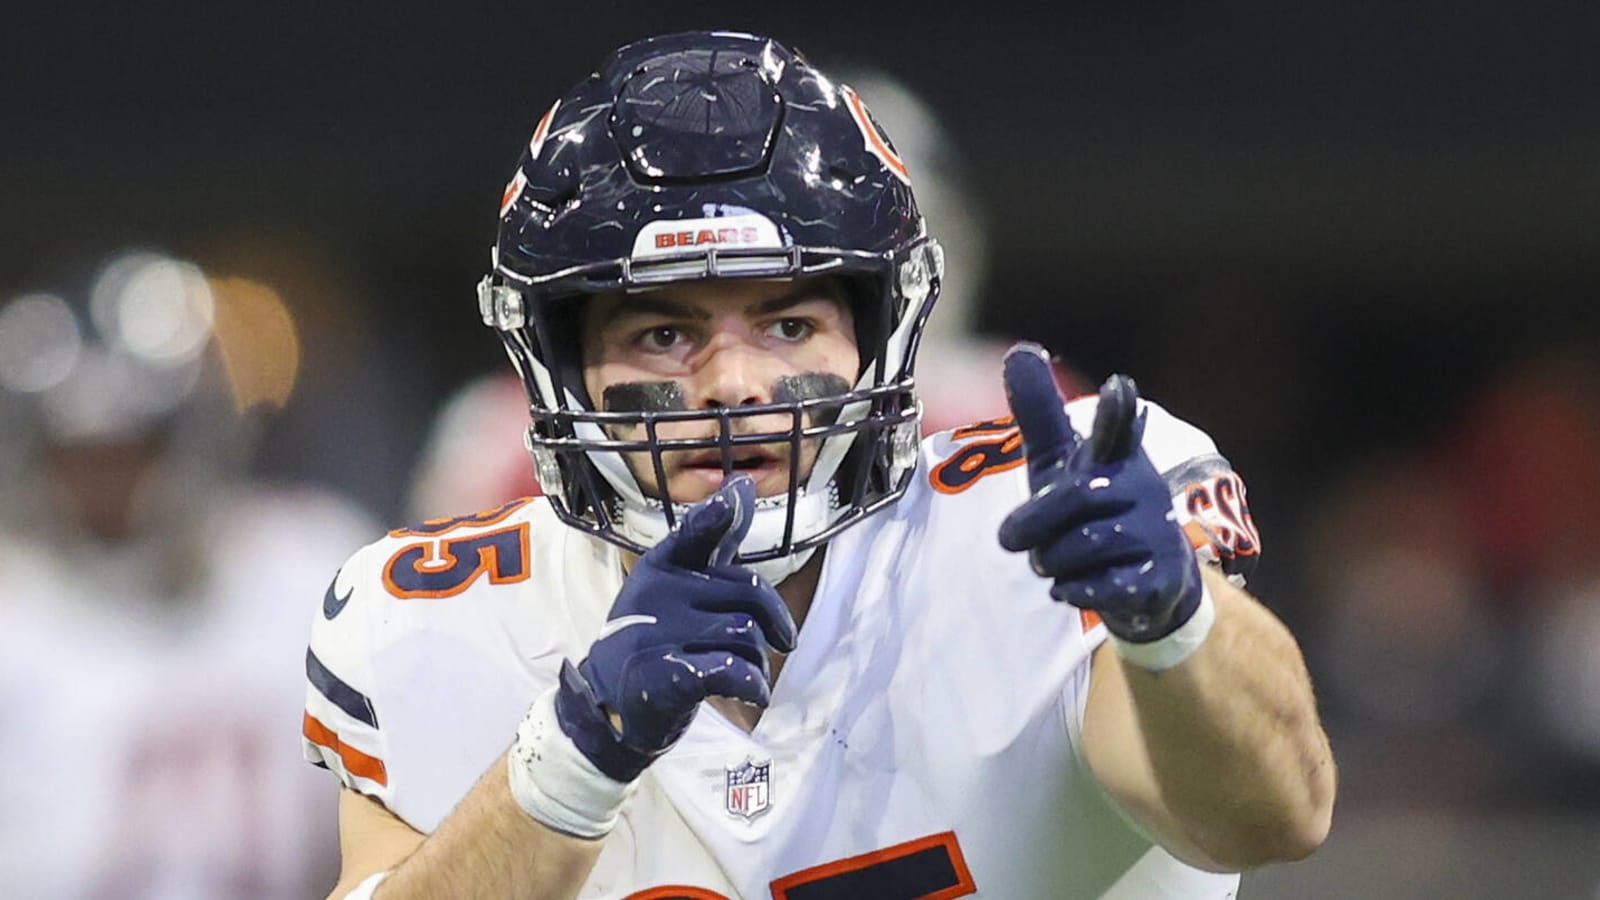 Bears TE Cole Kmet explains why they want Aaron Rodgers to start over Jordan Love